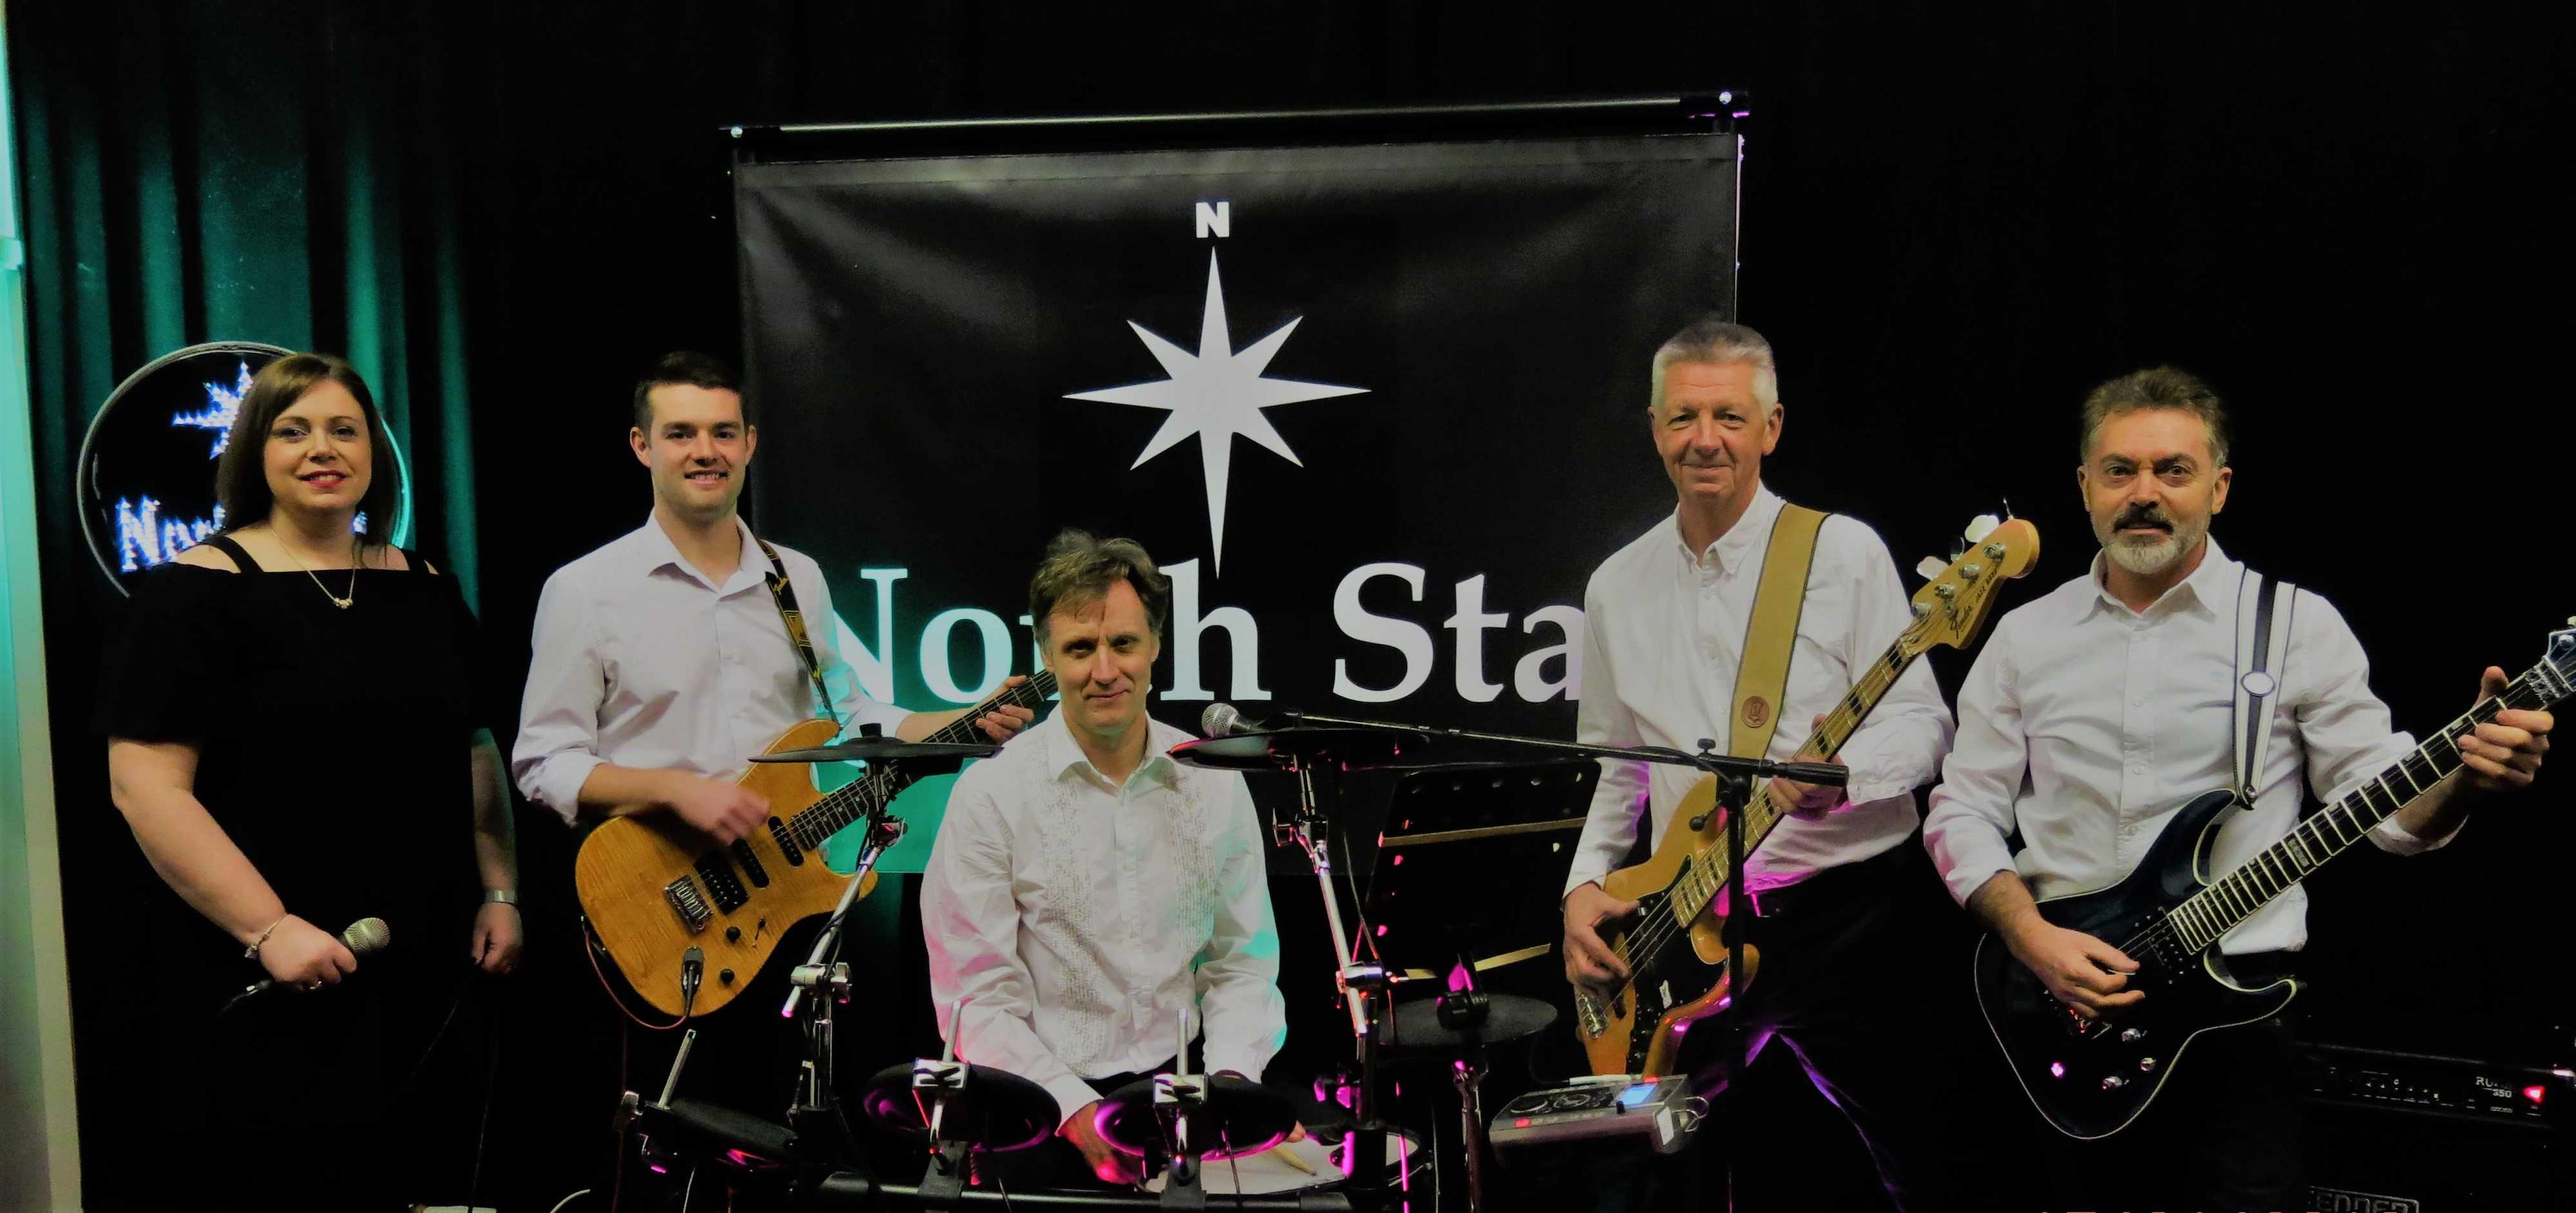 North Star party band group photo